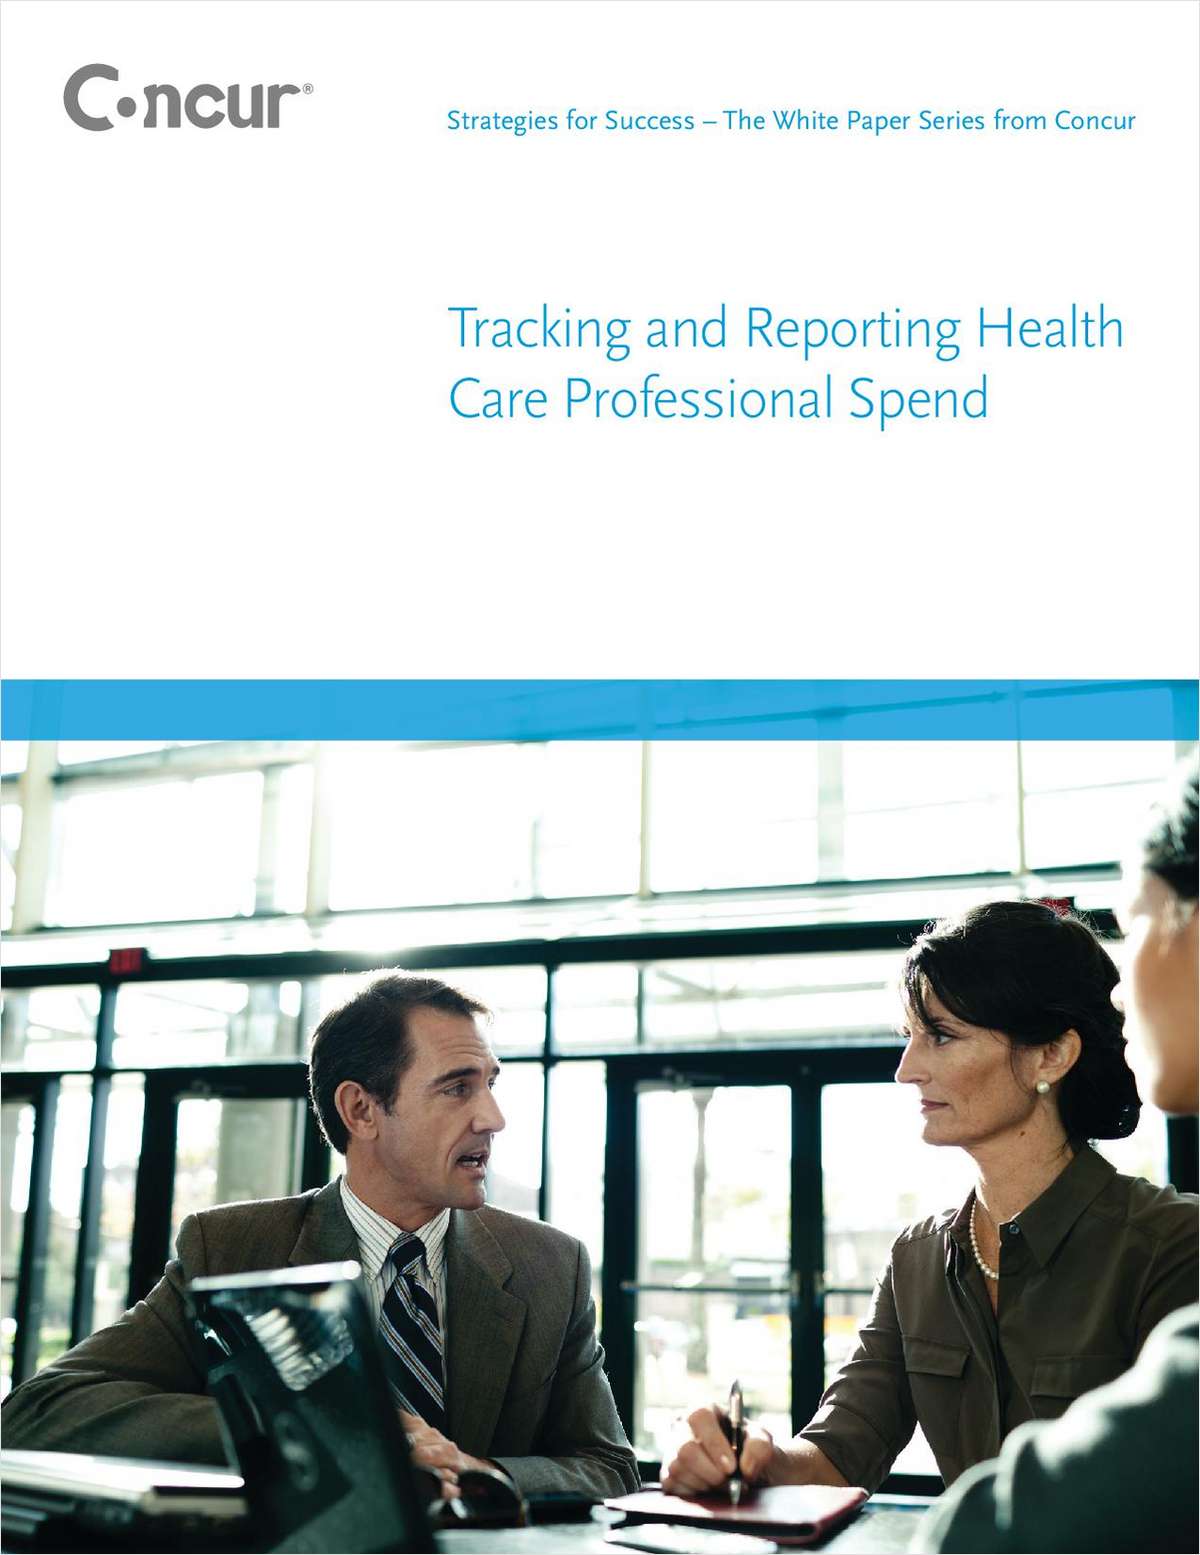 Tracking and Reporting Health Care Professional Spend